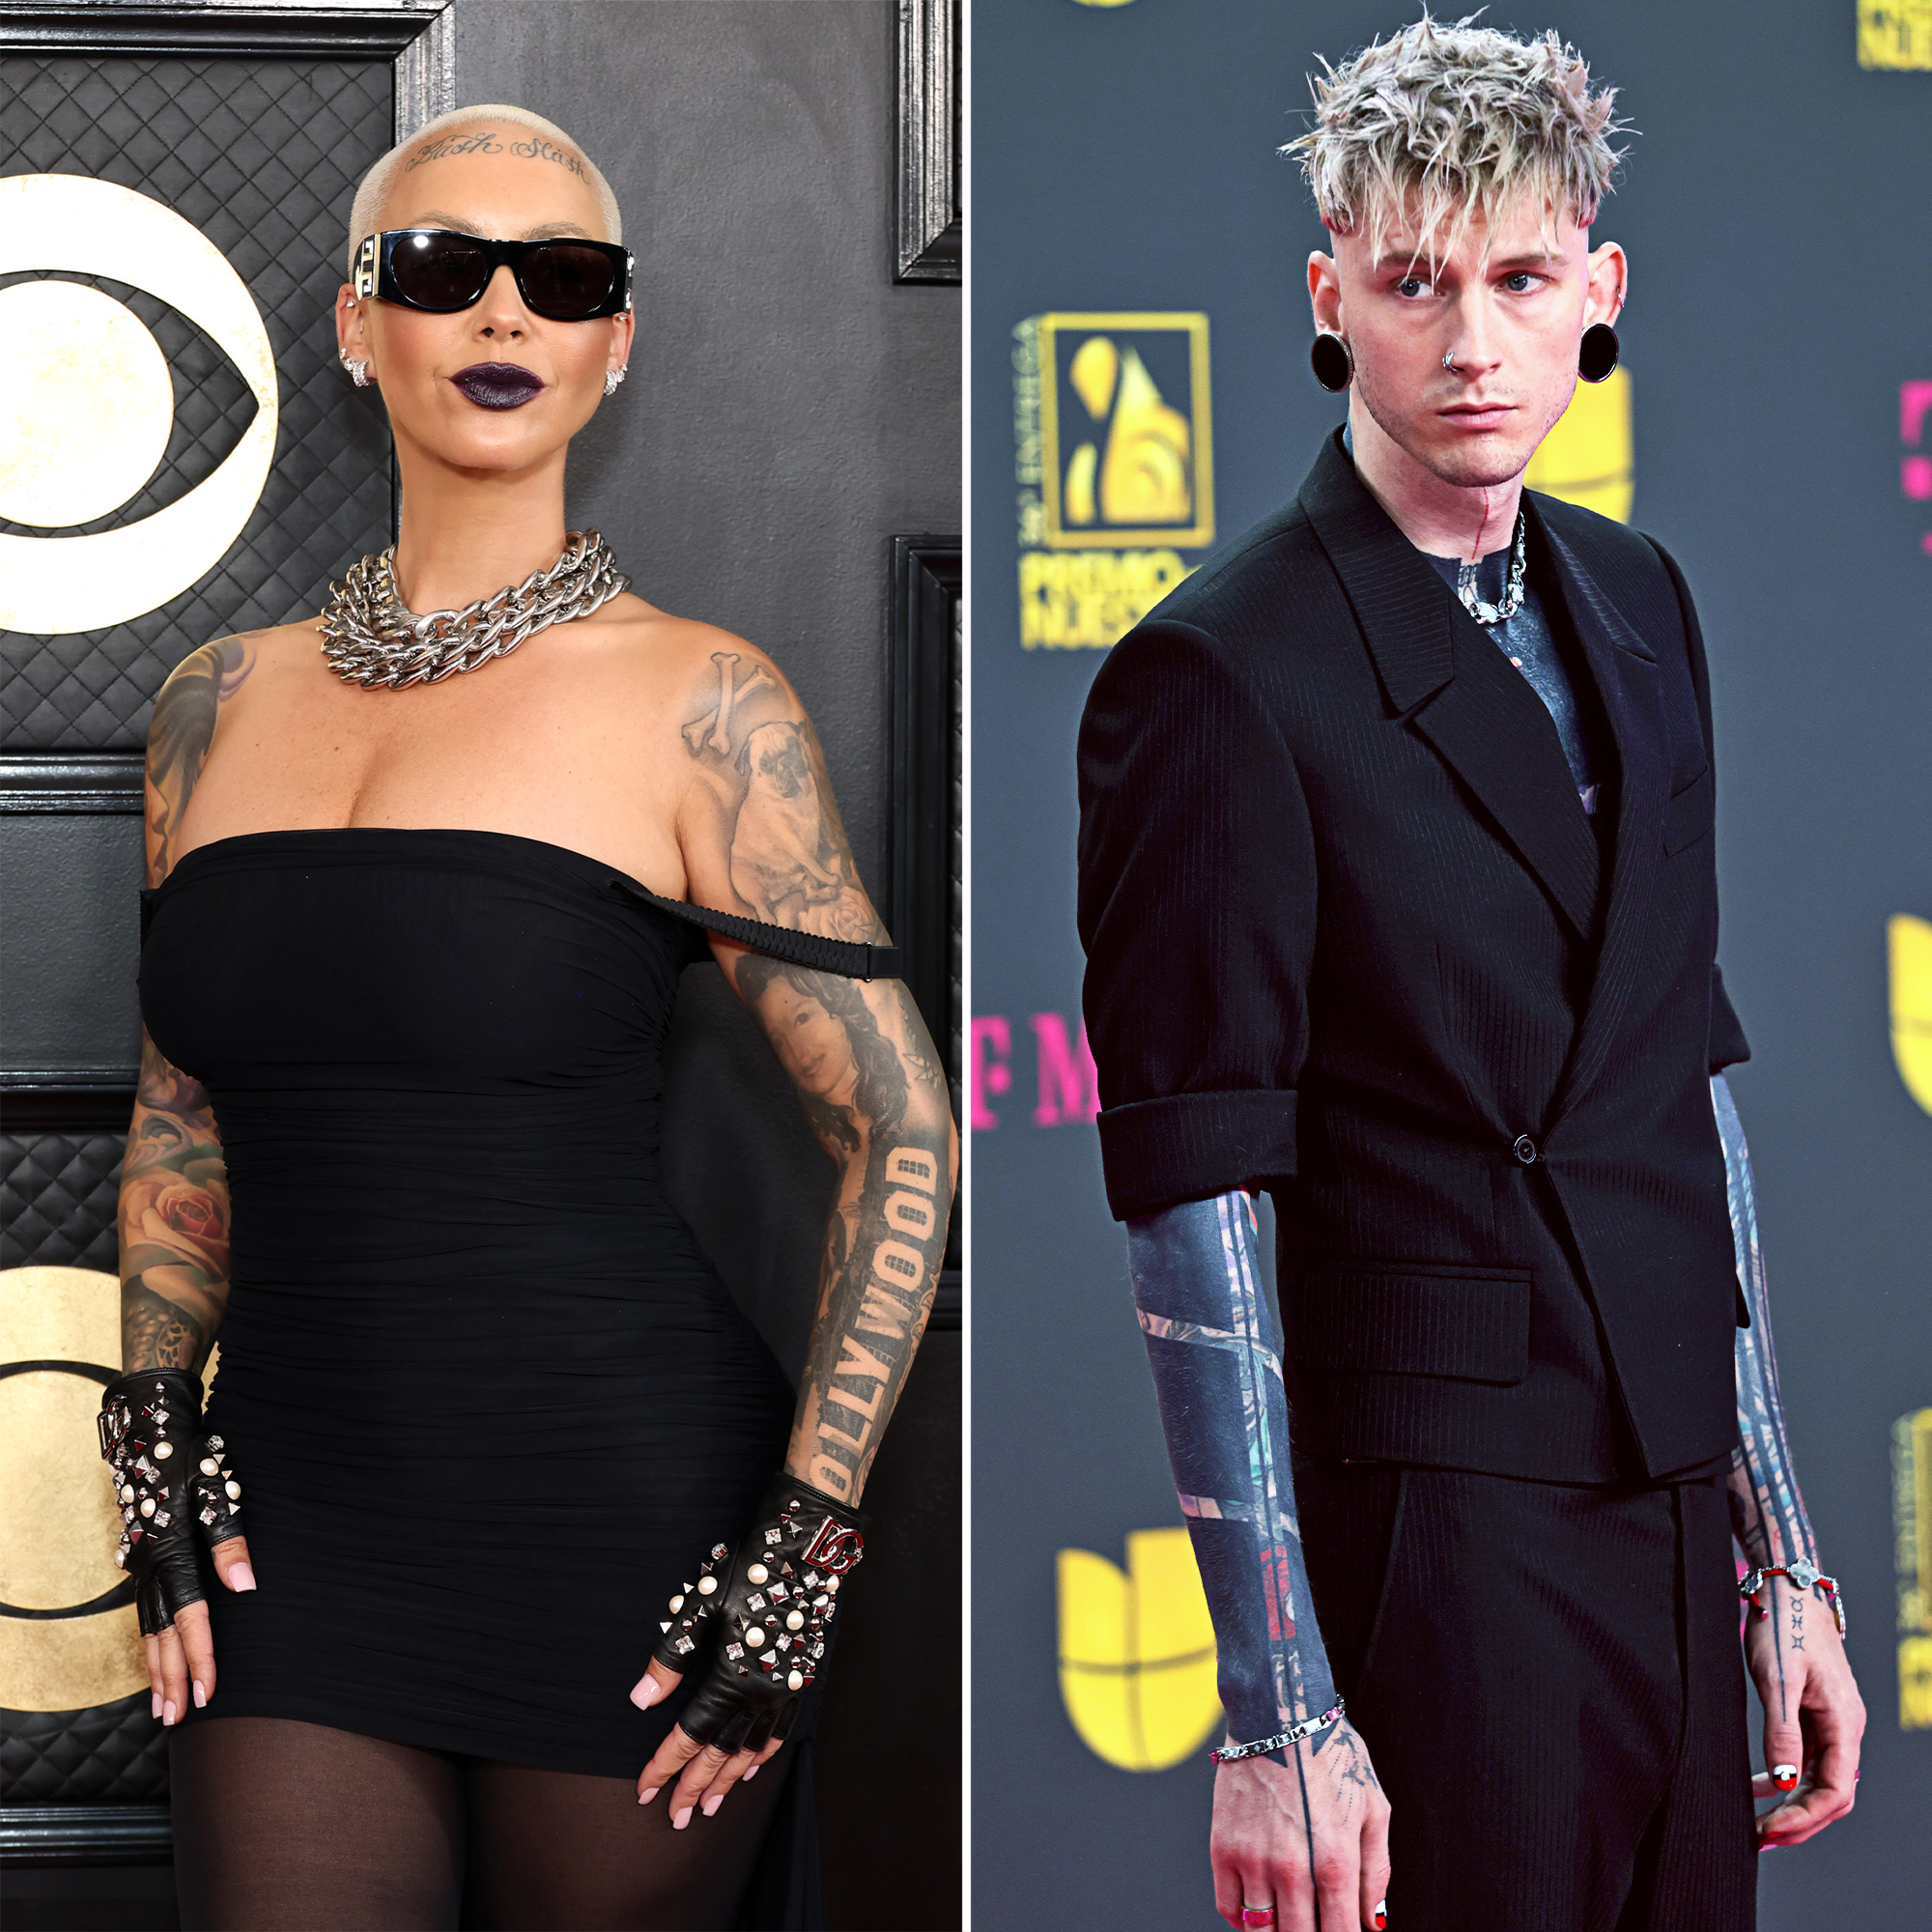 Amber Rose's dress is inspired by body chains